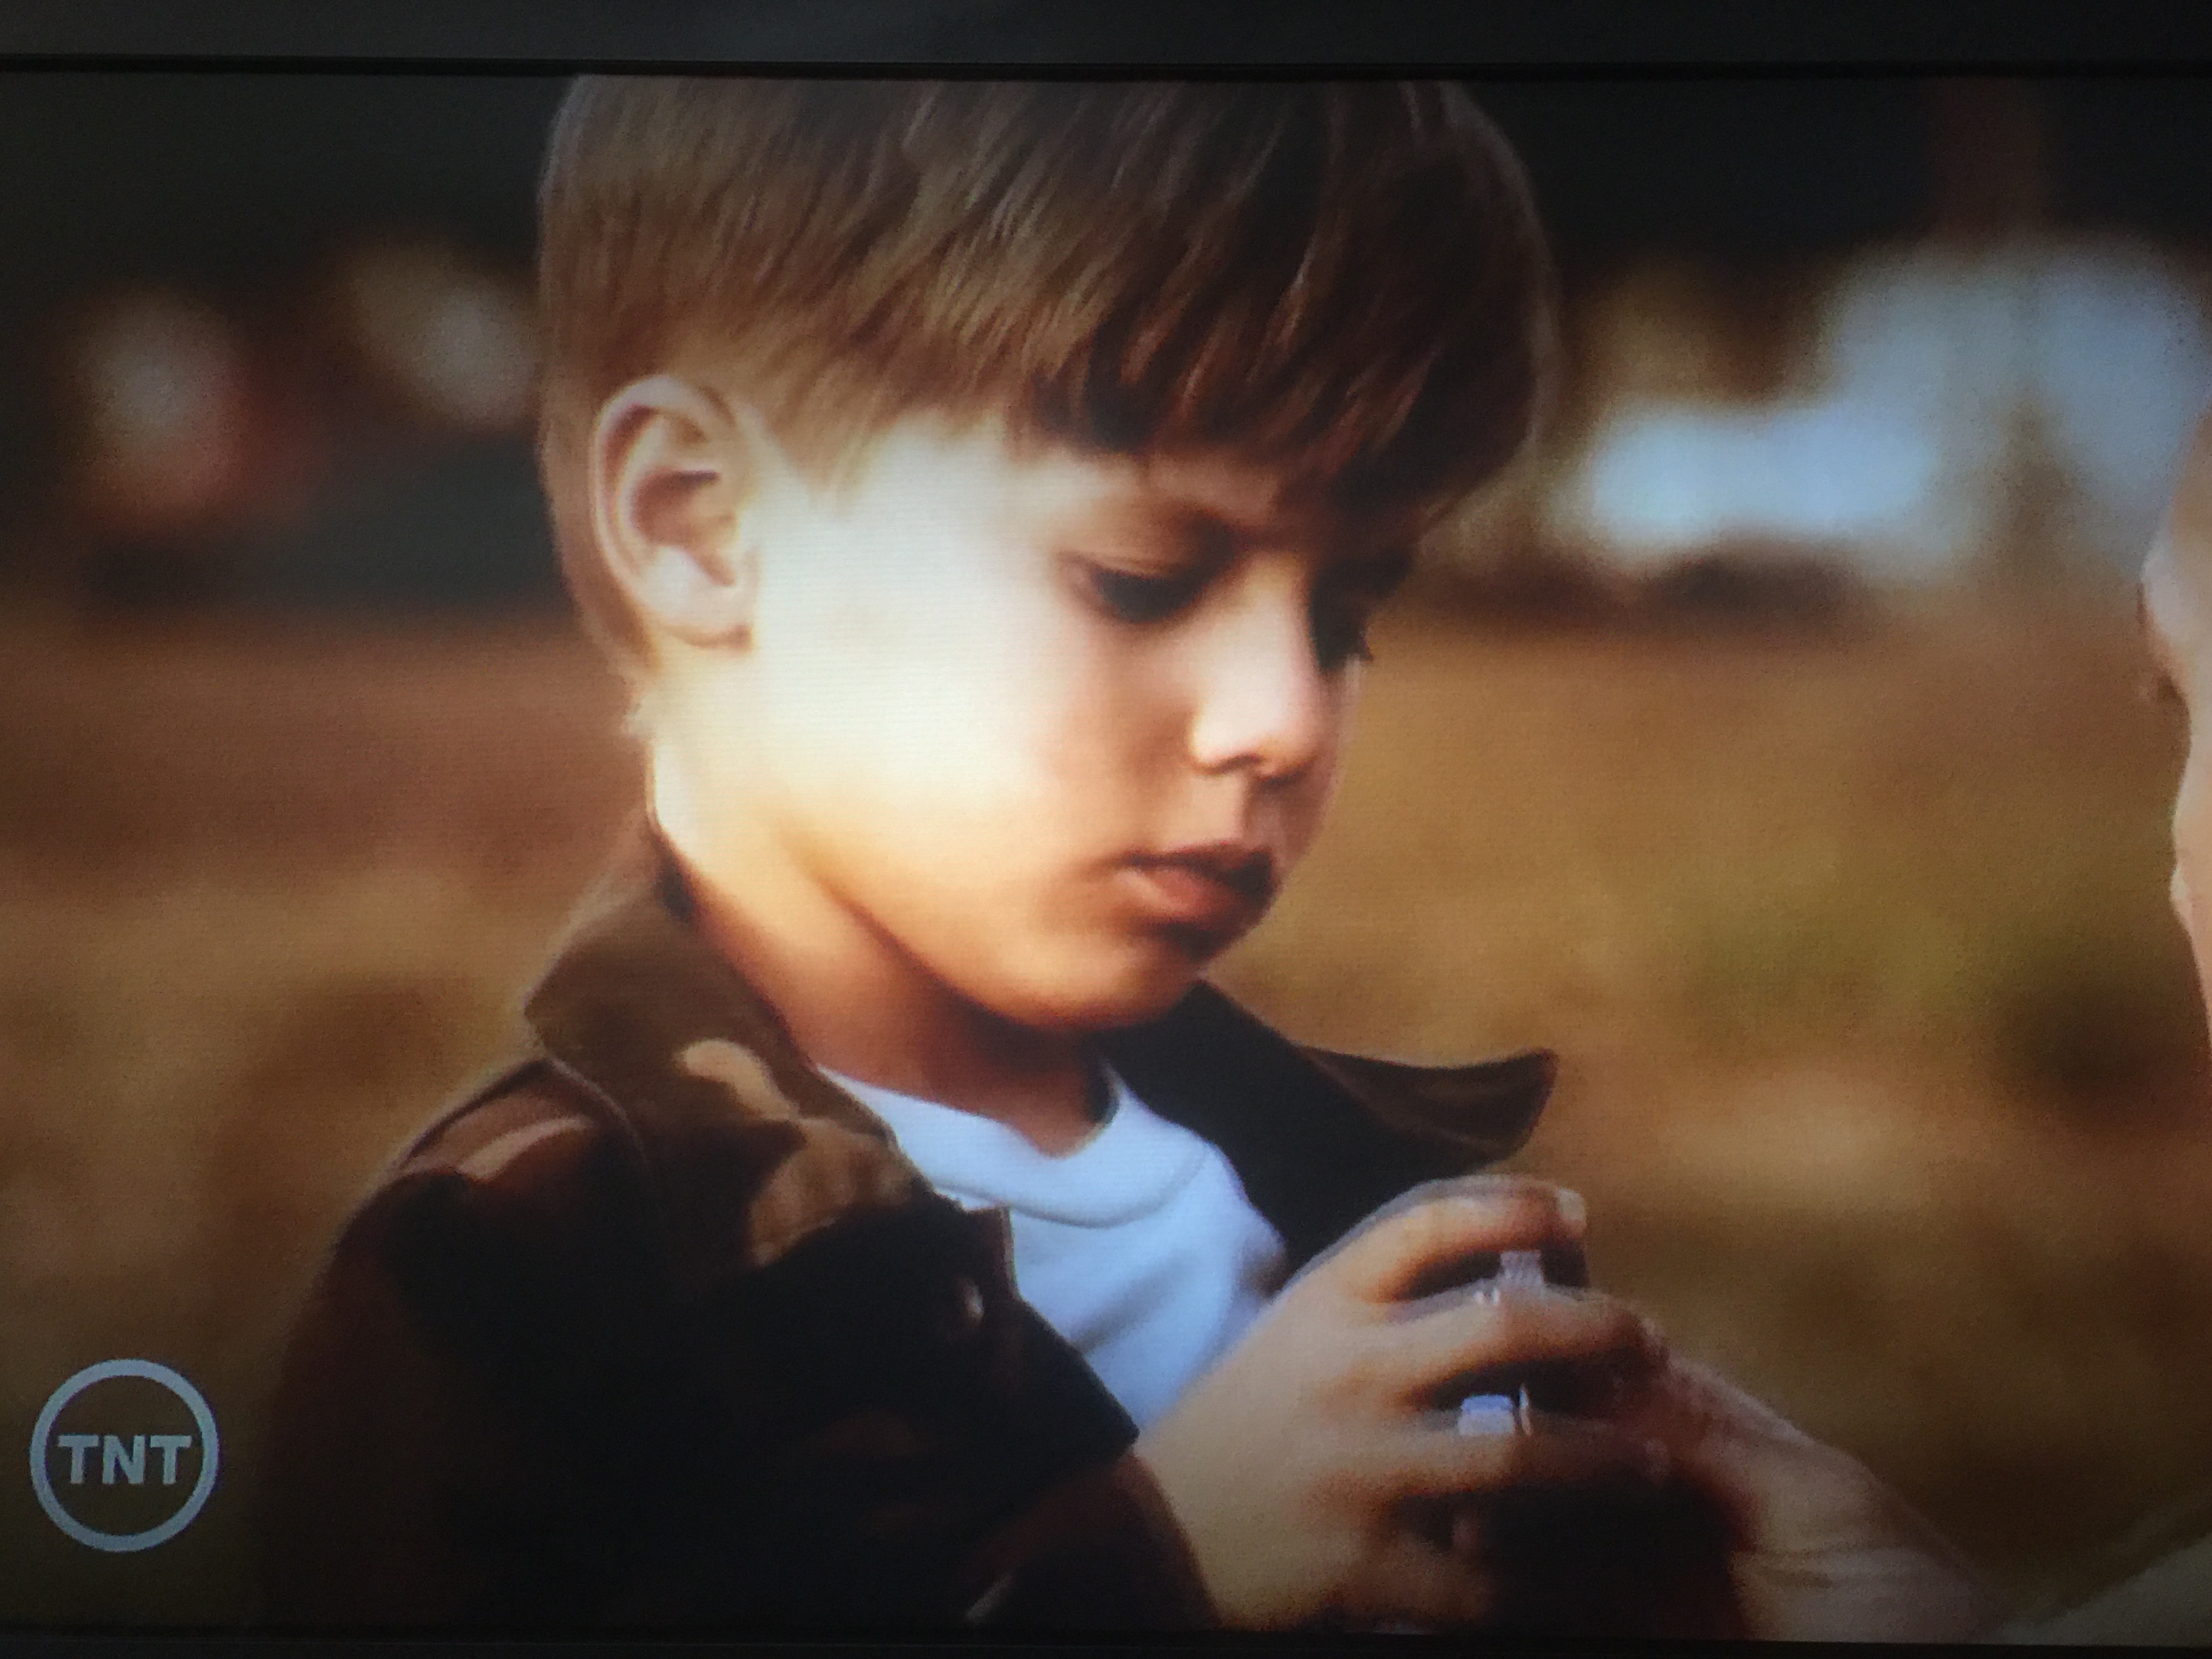 Cole Michaels as Young John Case in TNT's Agent X.